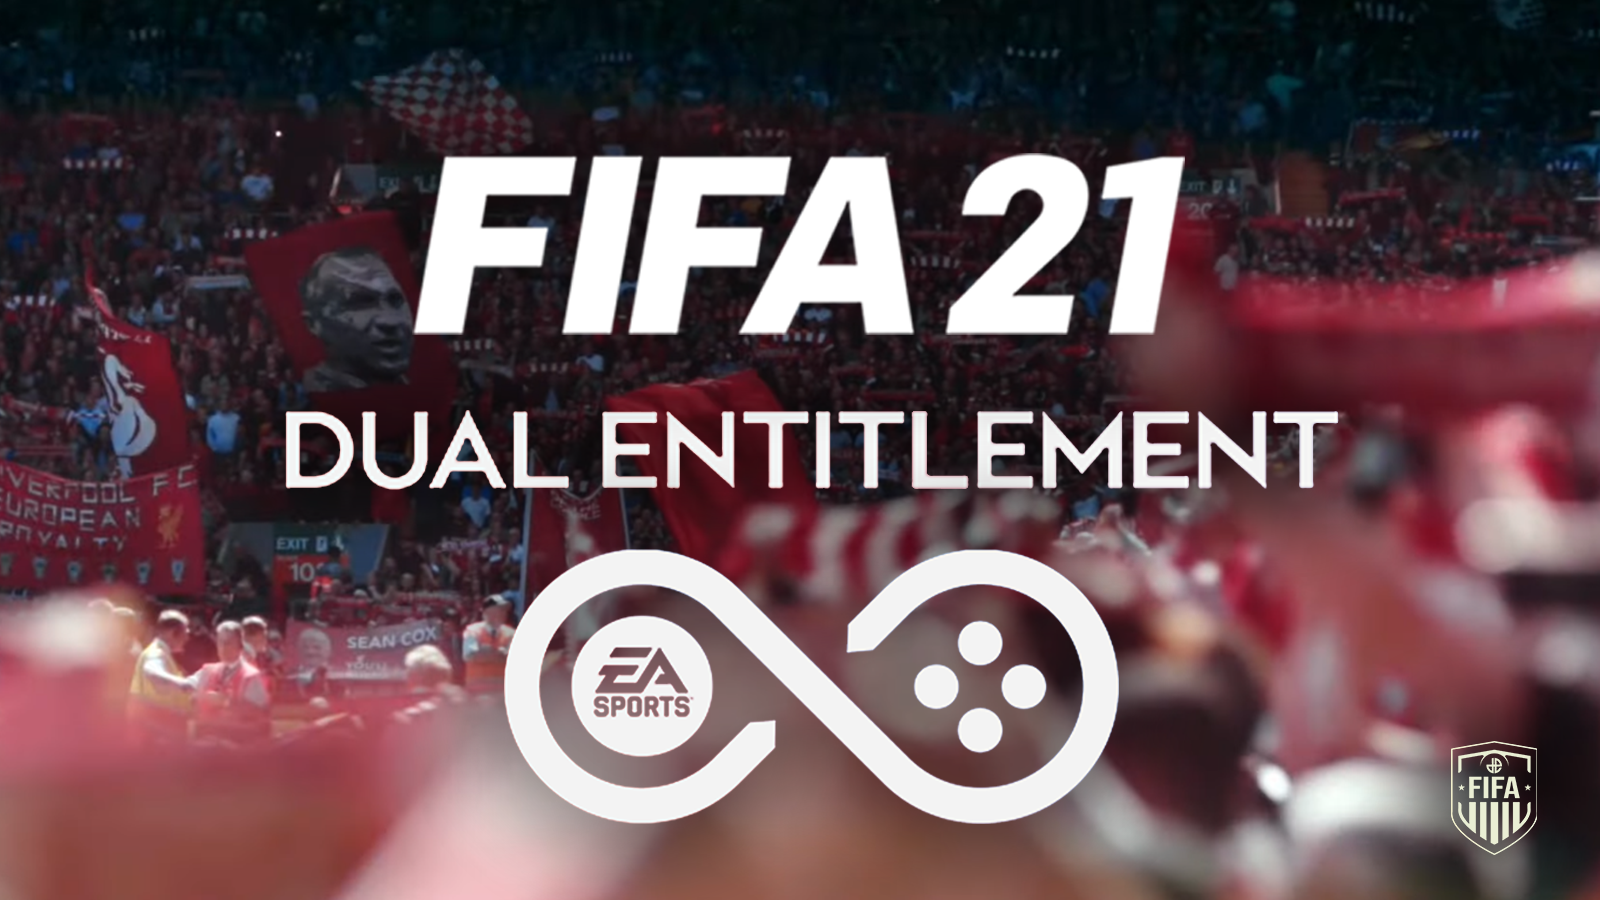 EA Offers Free FIFA 21 Next Gen Upgrade With 'Dual Entitlement